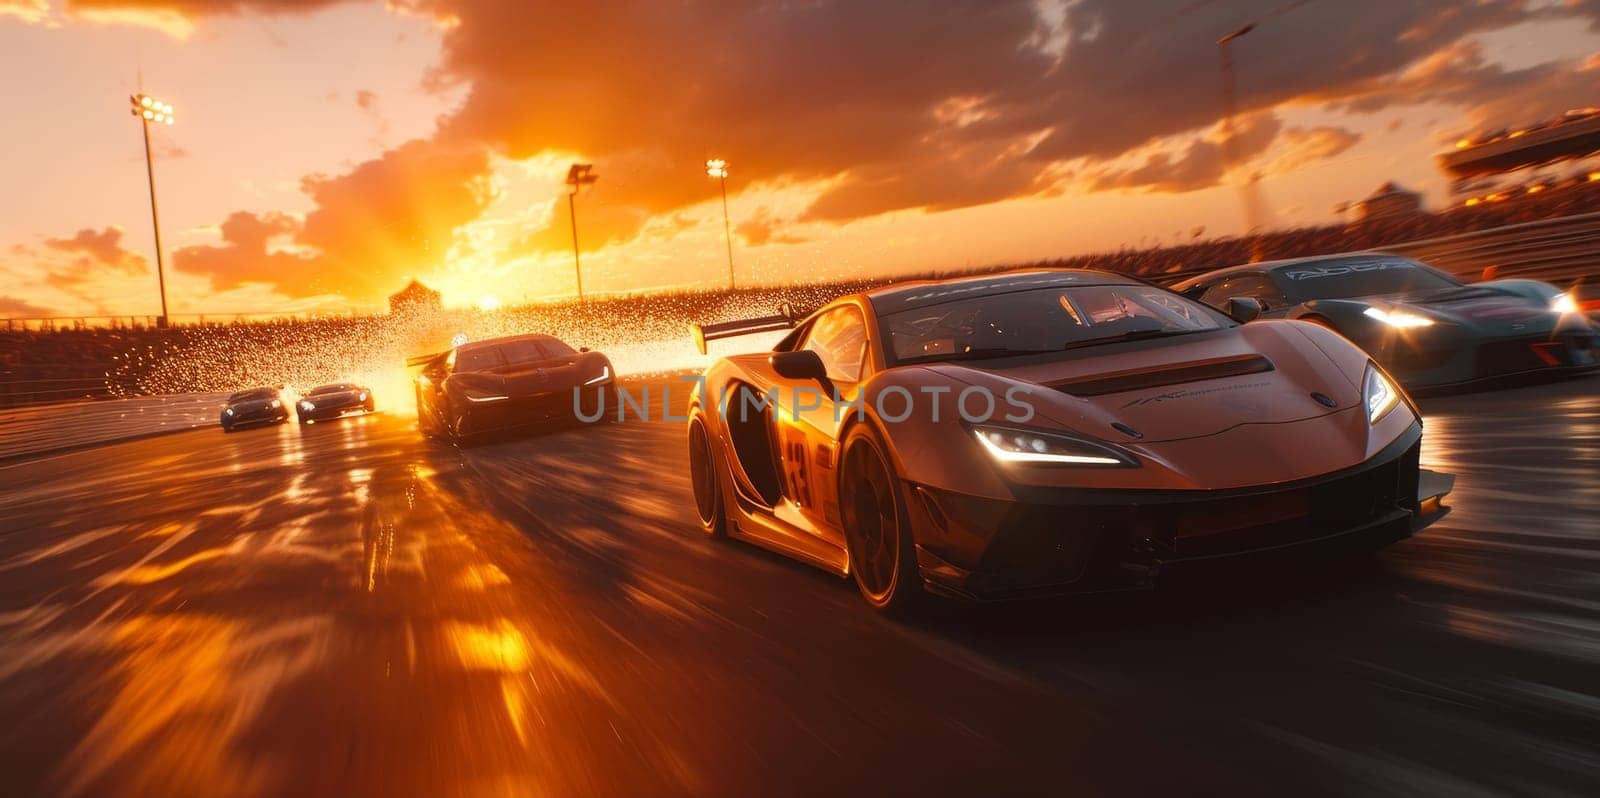 A spectacular scene on the speedway as racing cars compete against the backdrop of a stunning sunset, their motion captured in a vivid display of speed and agility